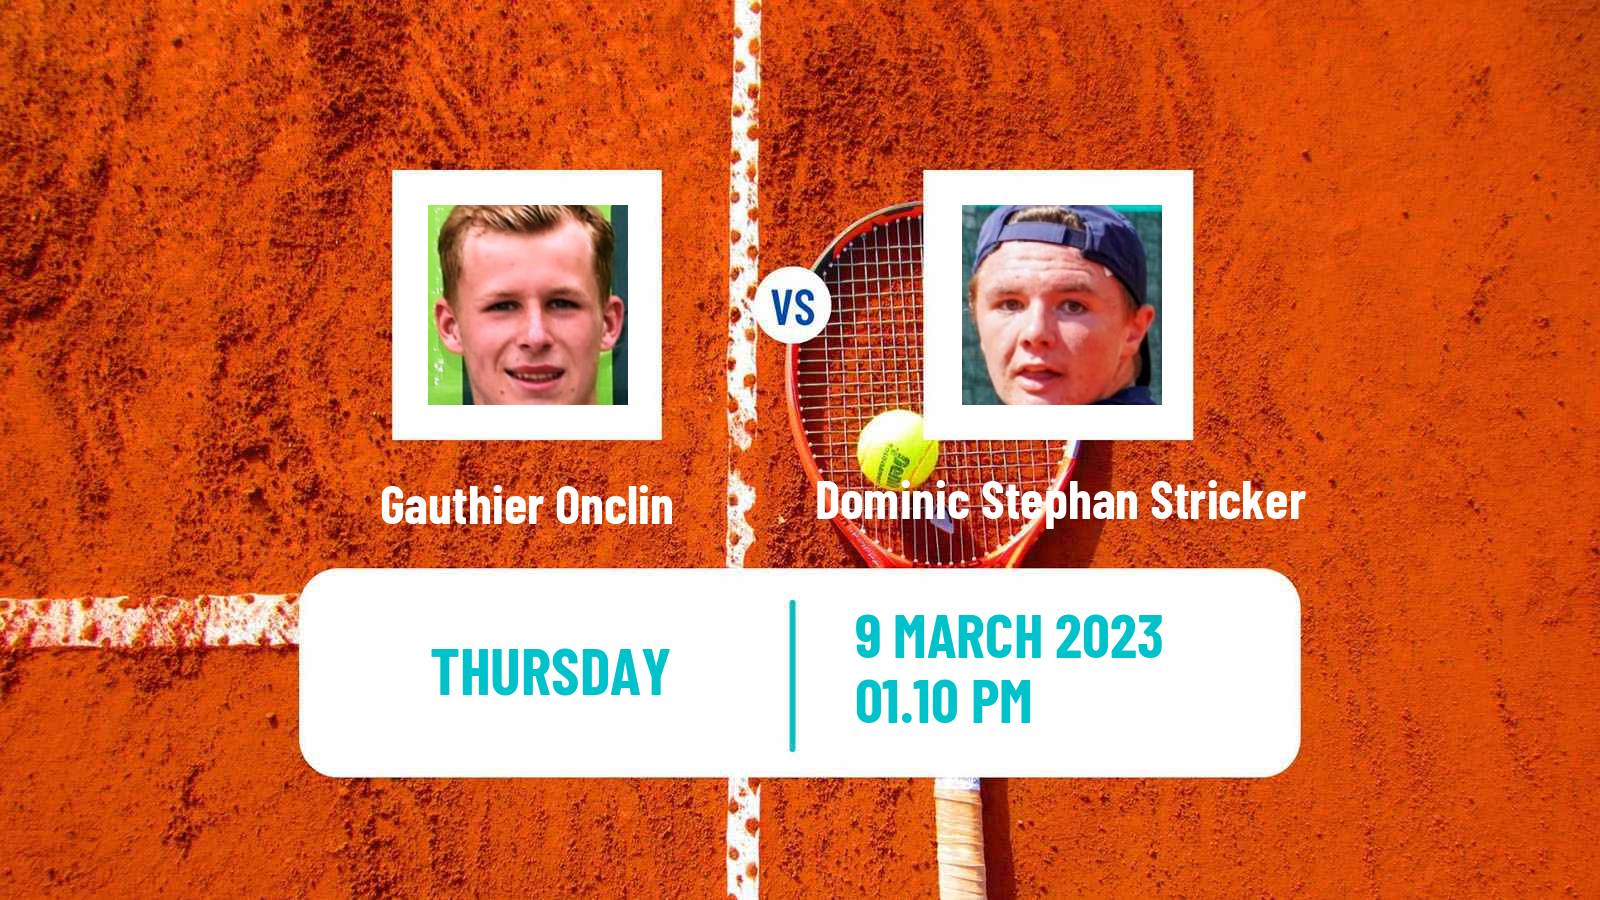 Tennis ATP Challenger Gauthier Onclin - Dominic Stephan Stricker